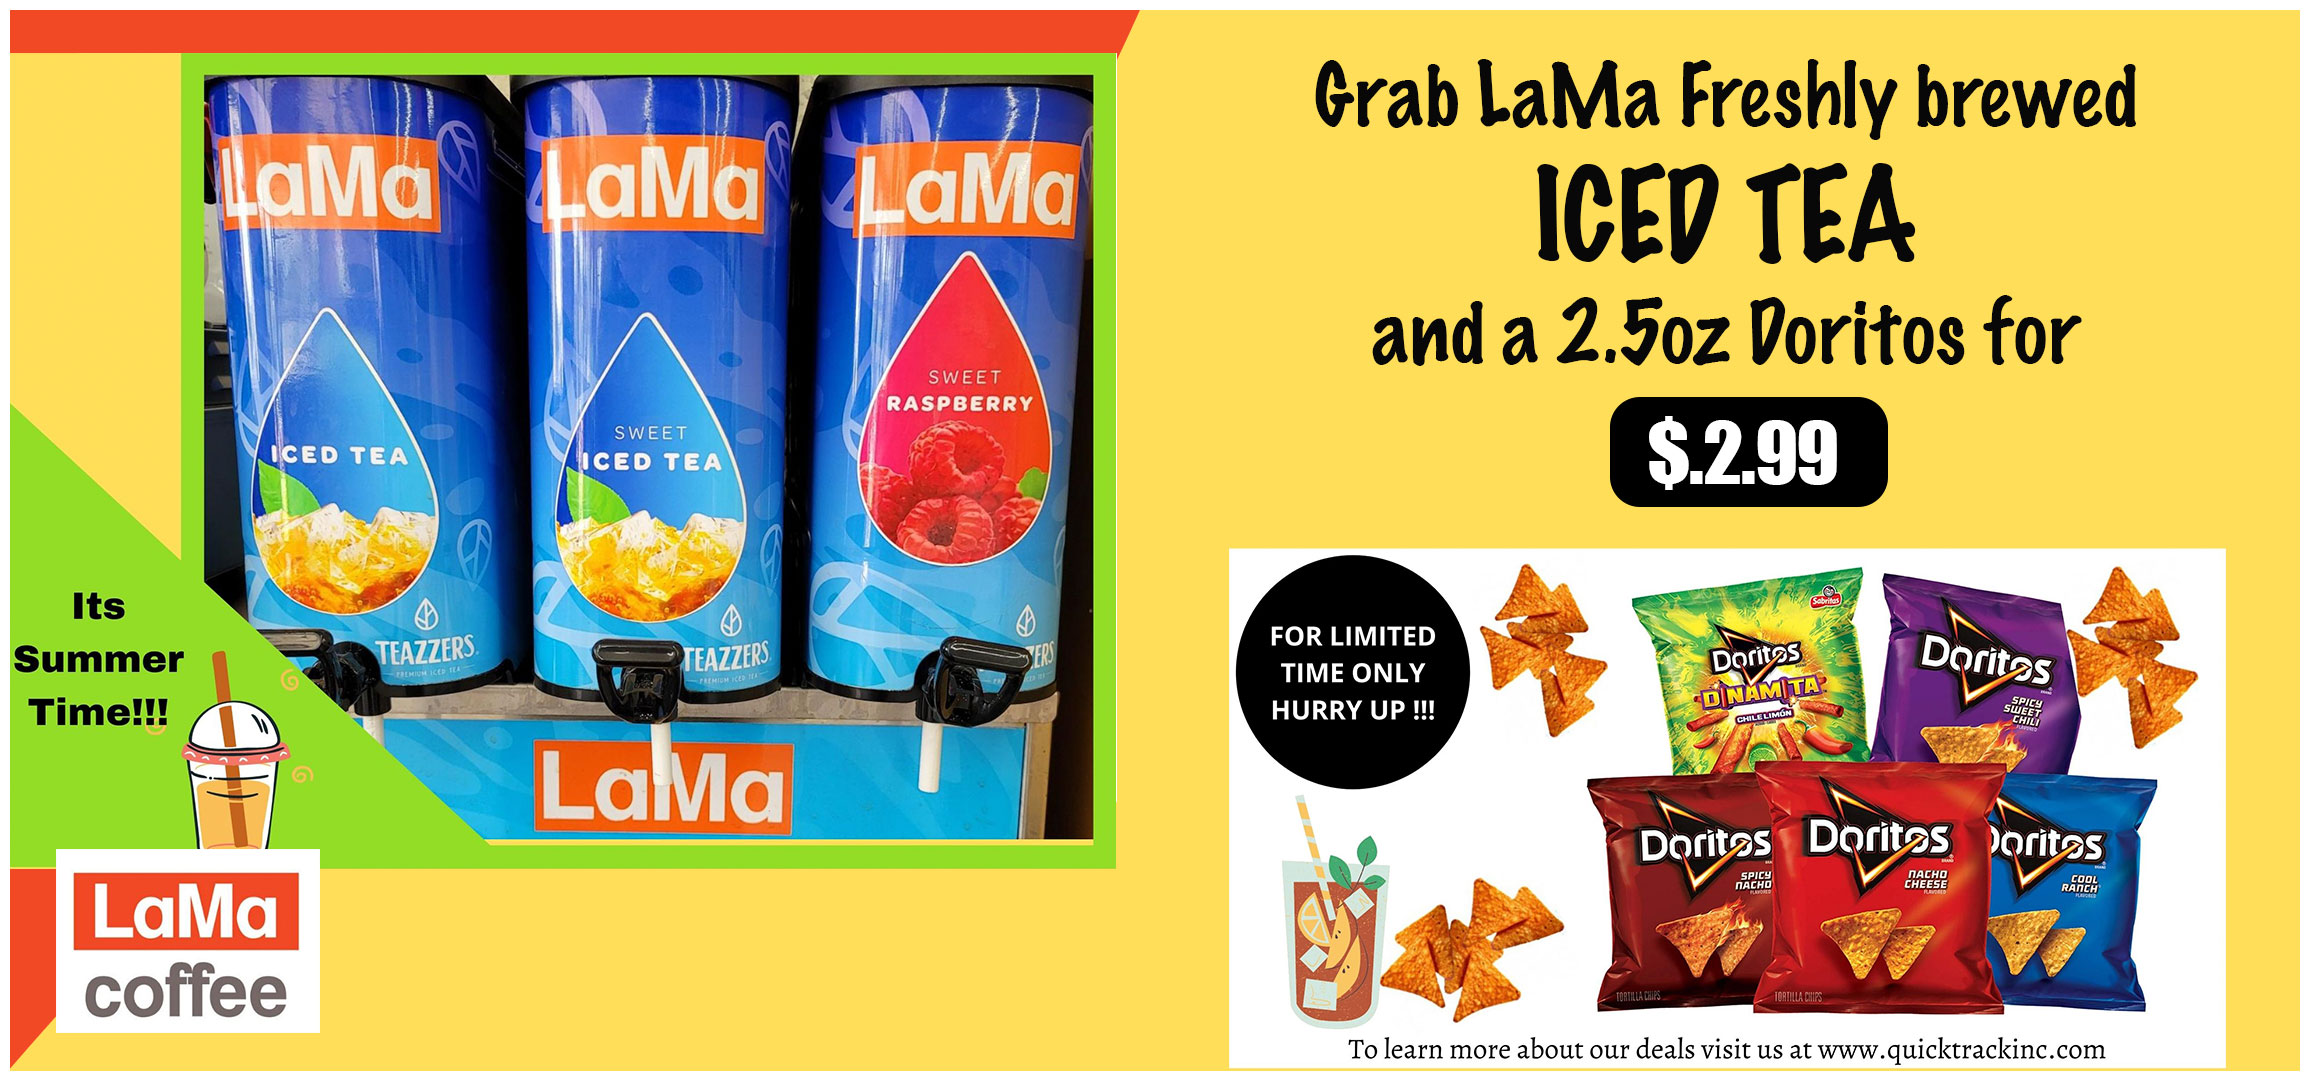 Freshly brewed Iced tea and 2.5oz doritos for just $2.99